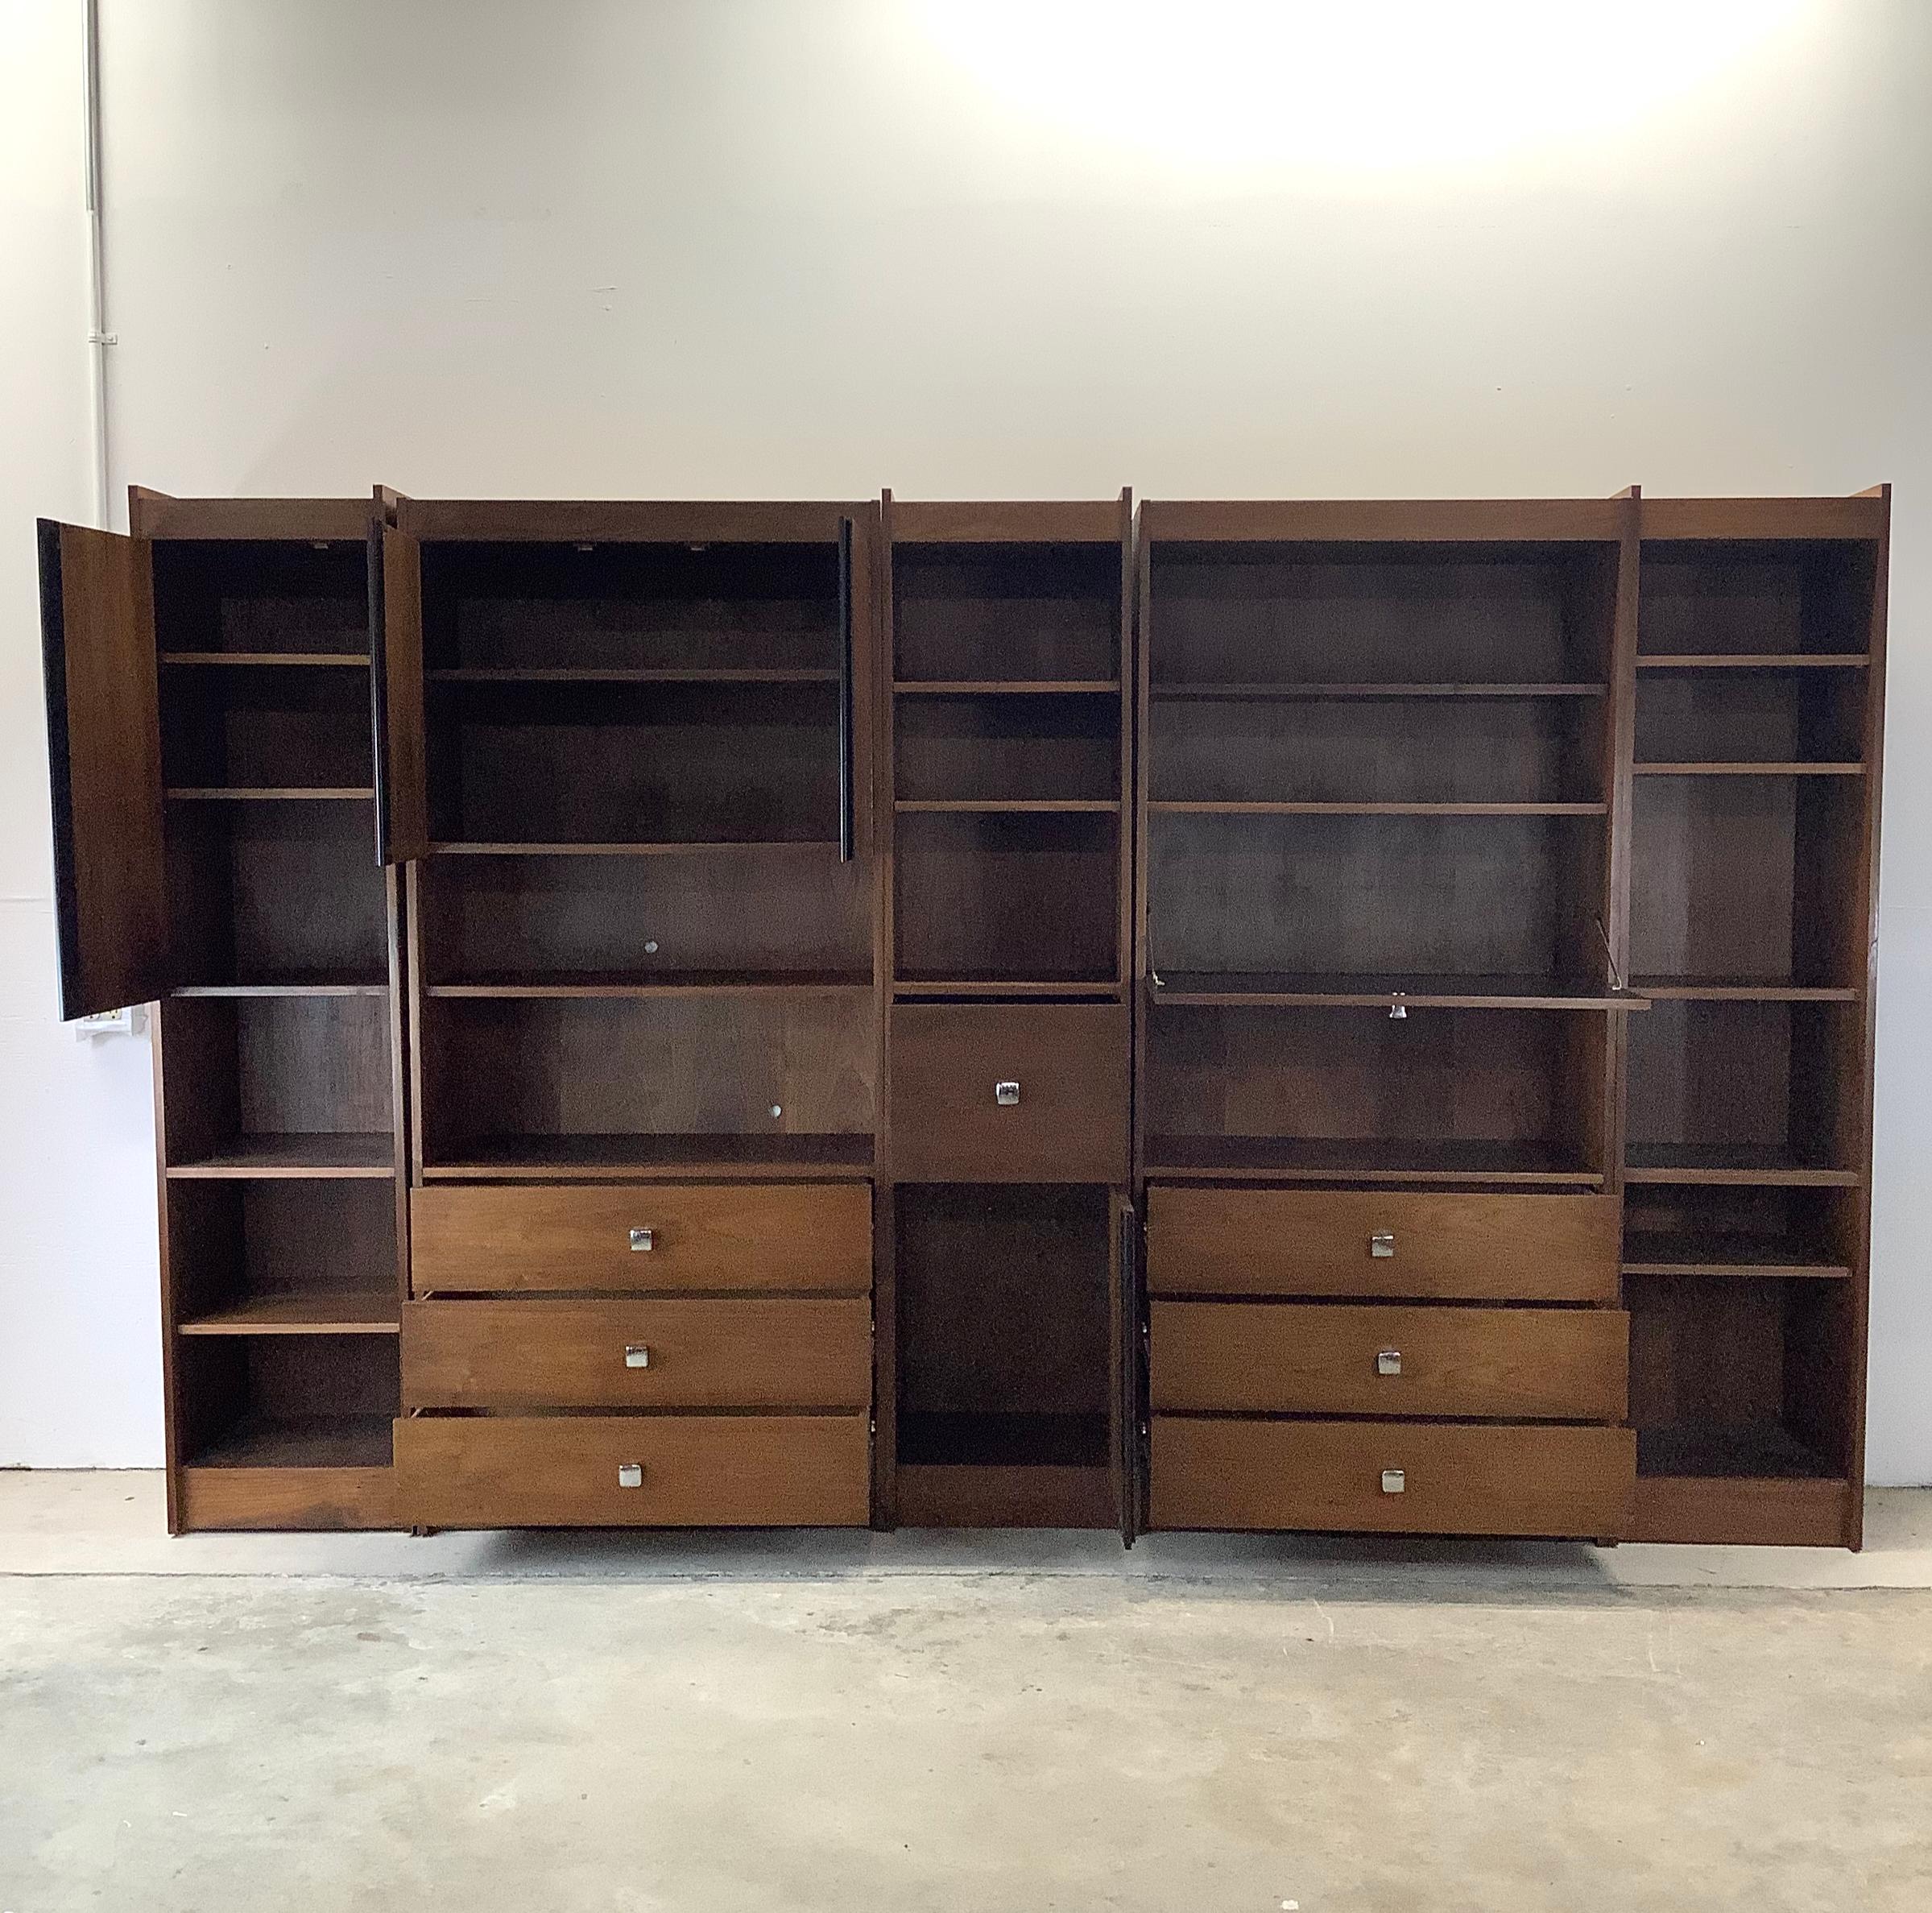 Imagine the storage possibilities of this Vintage Modern Five Piece Wood Bookcase – a versatile and stylish storage solution that adds both functionality and flair to any home or office space. Crafted with quality wood in a timeless mid-century